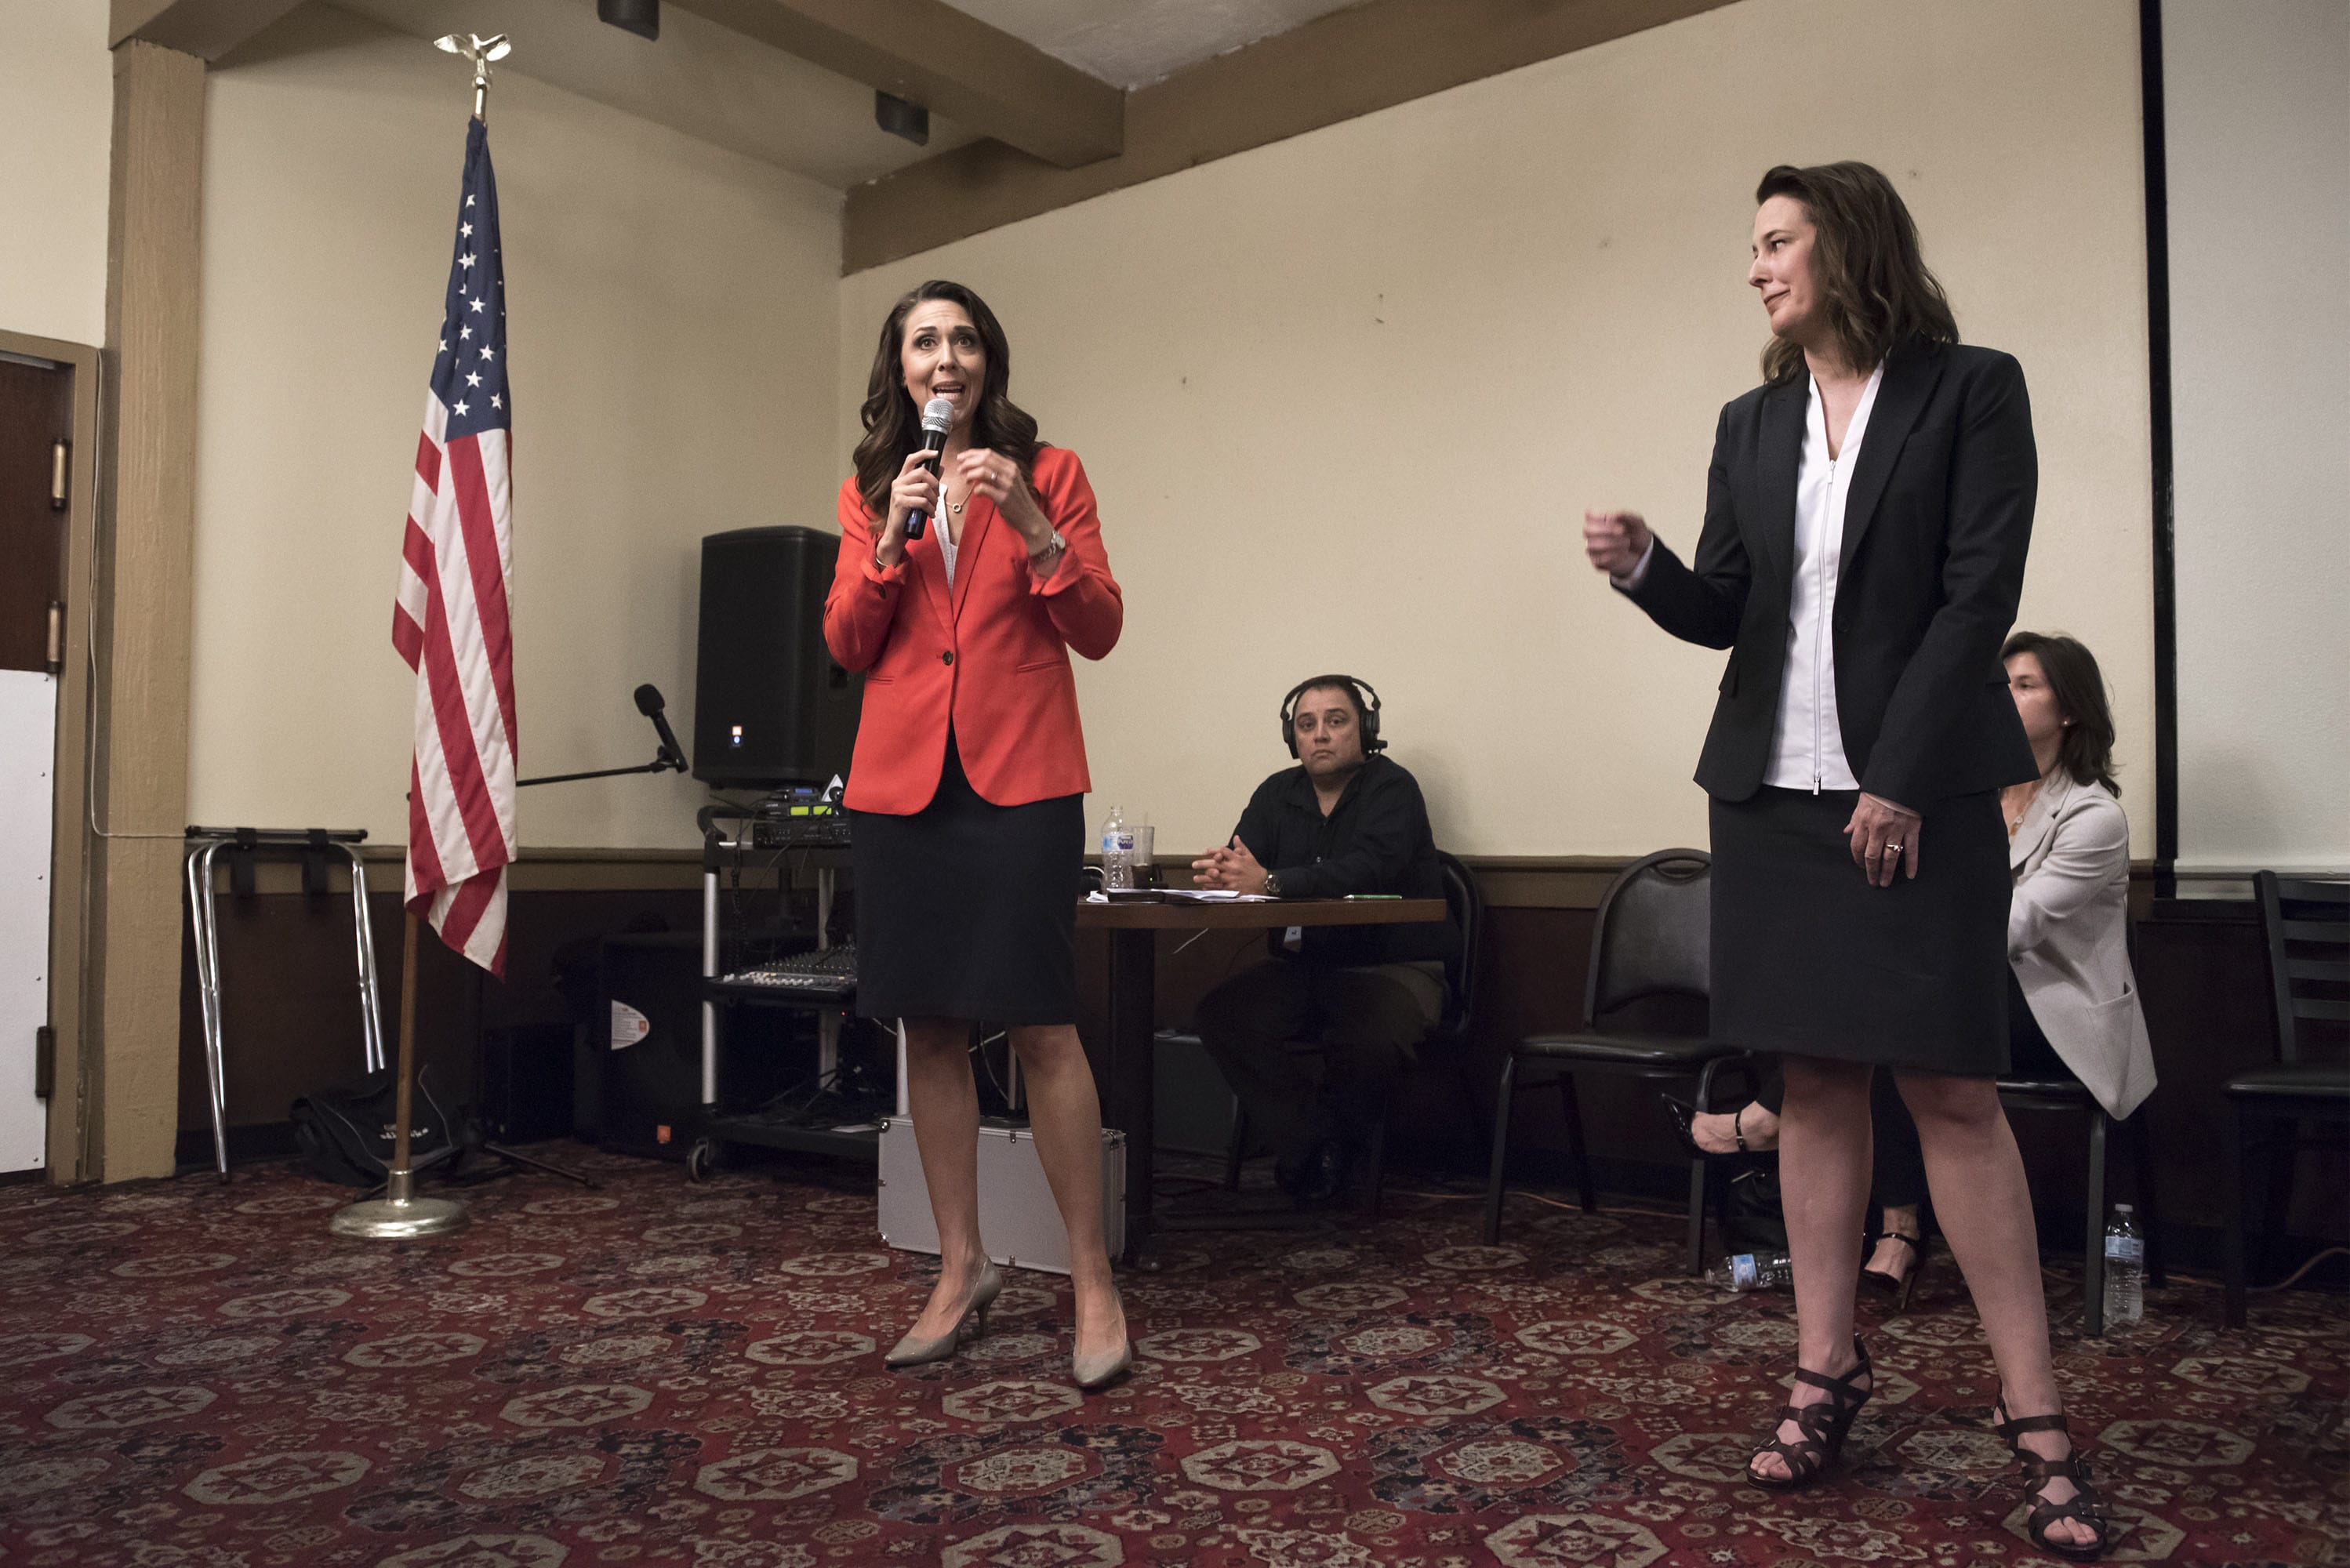 Incumbent U.S. Rep. Jaime Herrera Beutler, R-Battle Ground, left, speaks while Candidate Carolyn Long, reacts during the 3rd Congressional Candidate Forum hosted by the Woodland Chamber of Commerce at the Oaktree Restaurant in Woodland on Tuesday afternoon, Sept. 18, 2018.